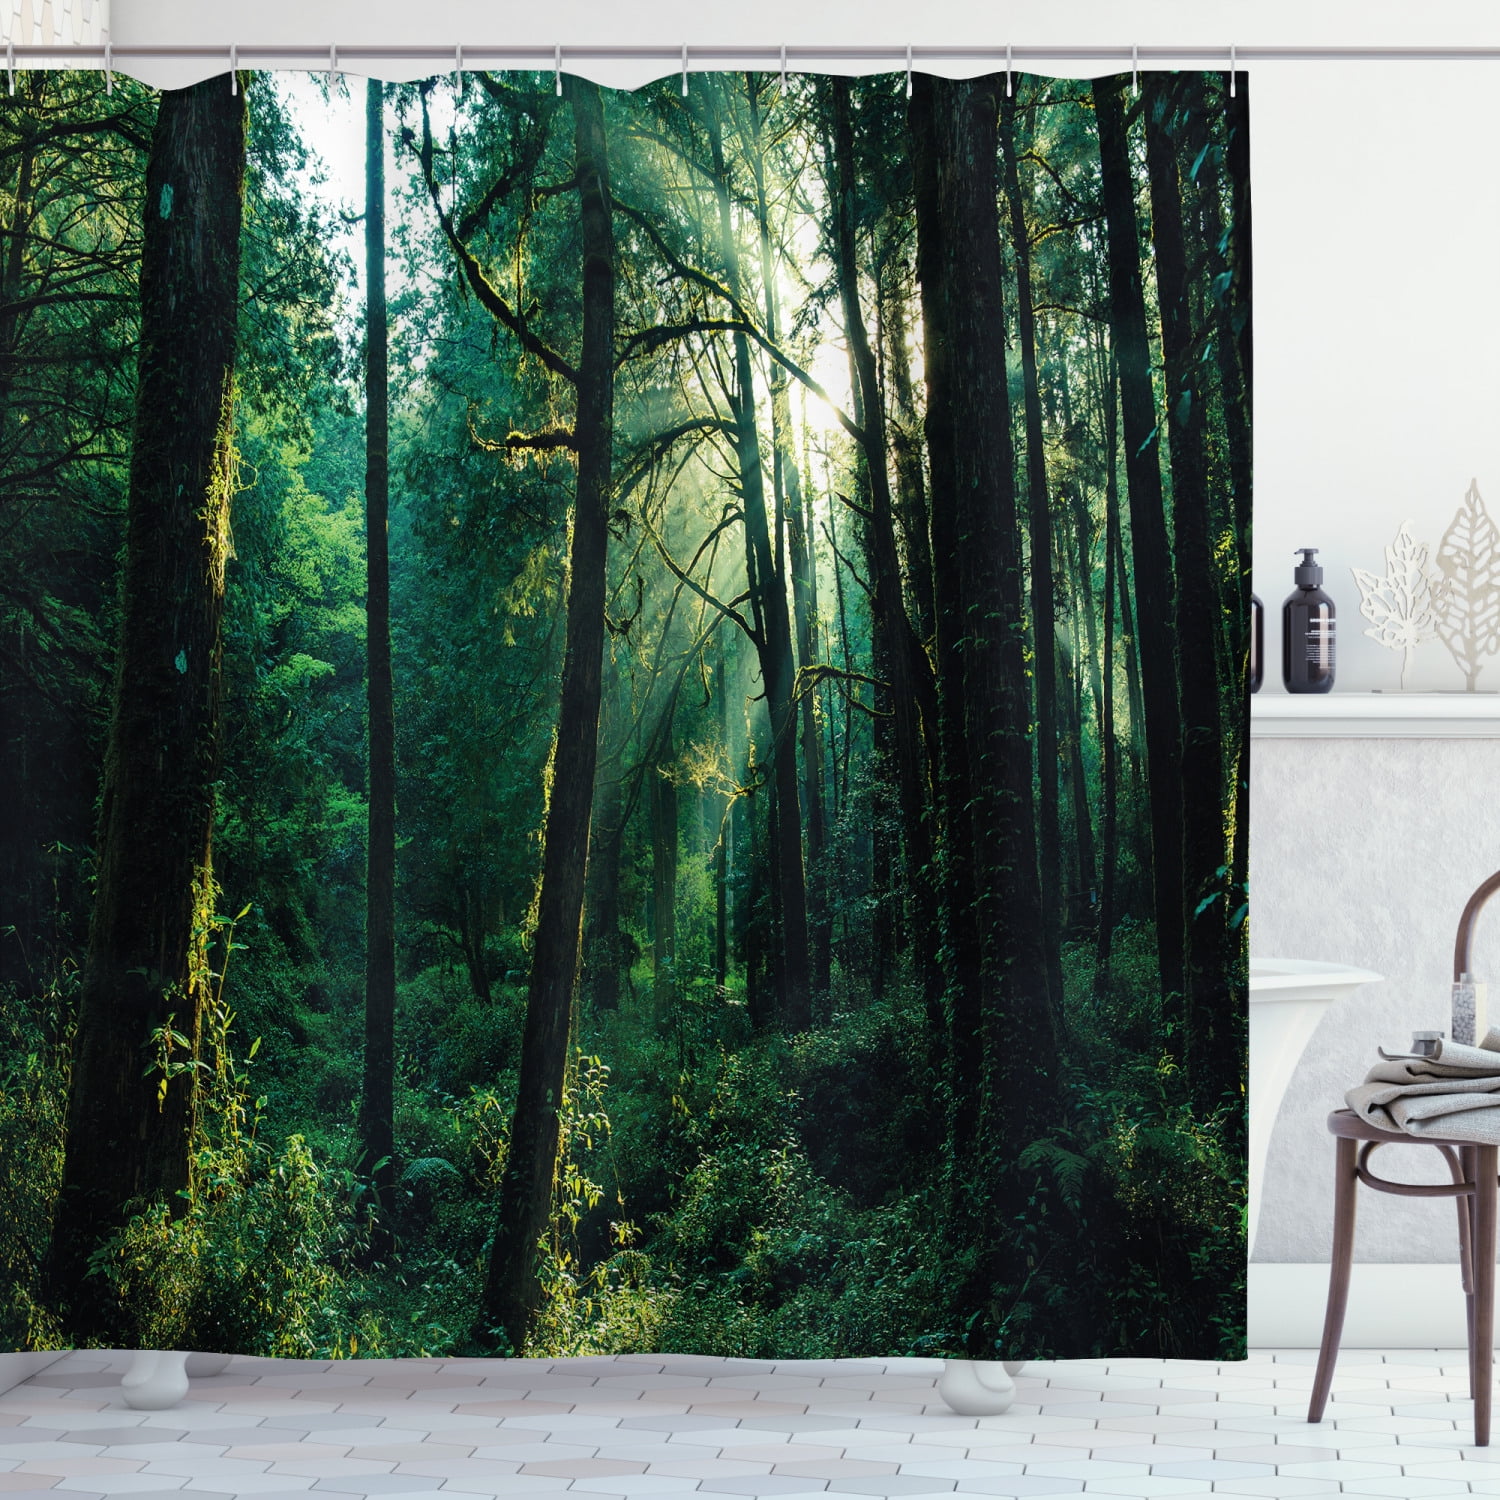 Forest Park Scenic Picture Reflection Sunset Landscape Picture Shower Curtain 